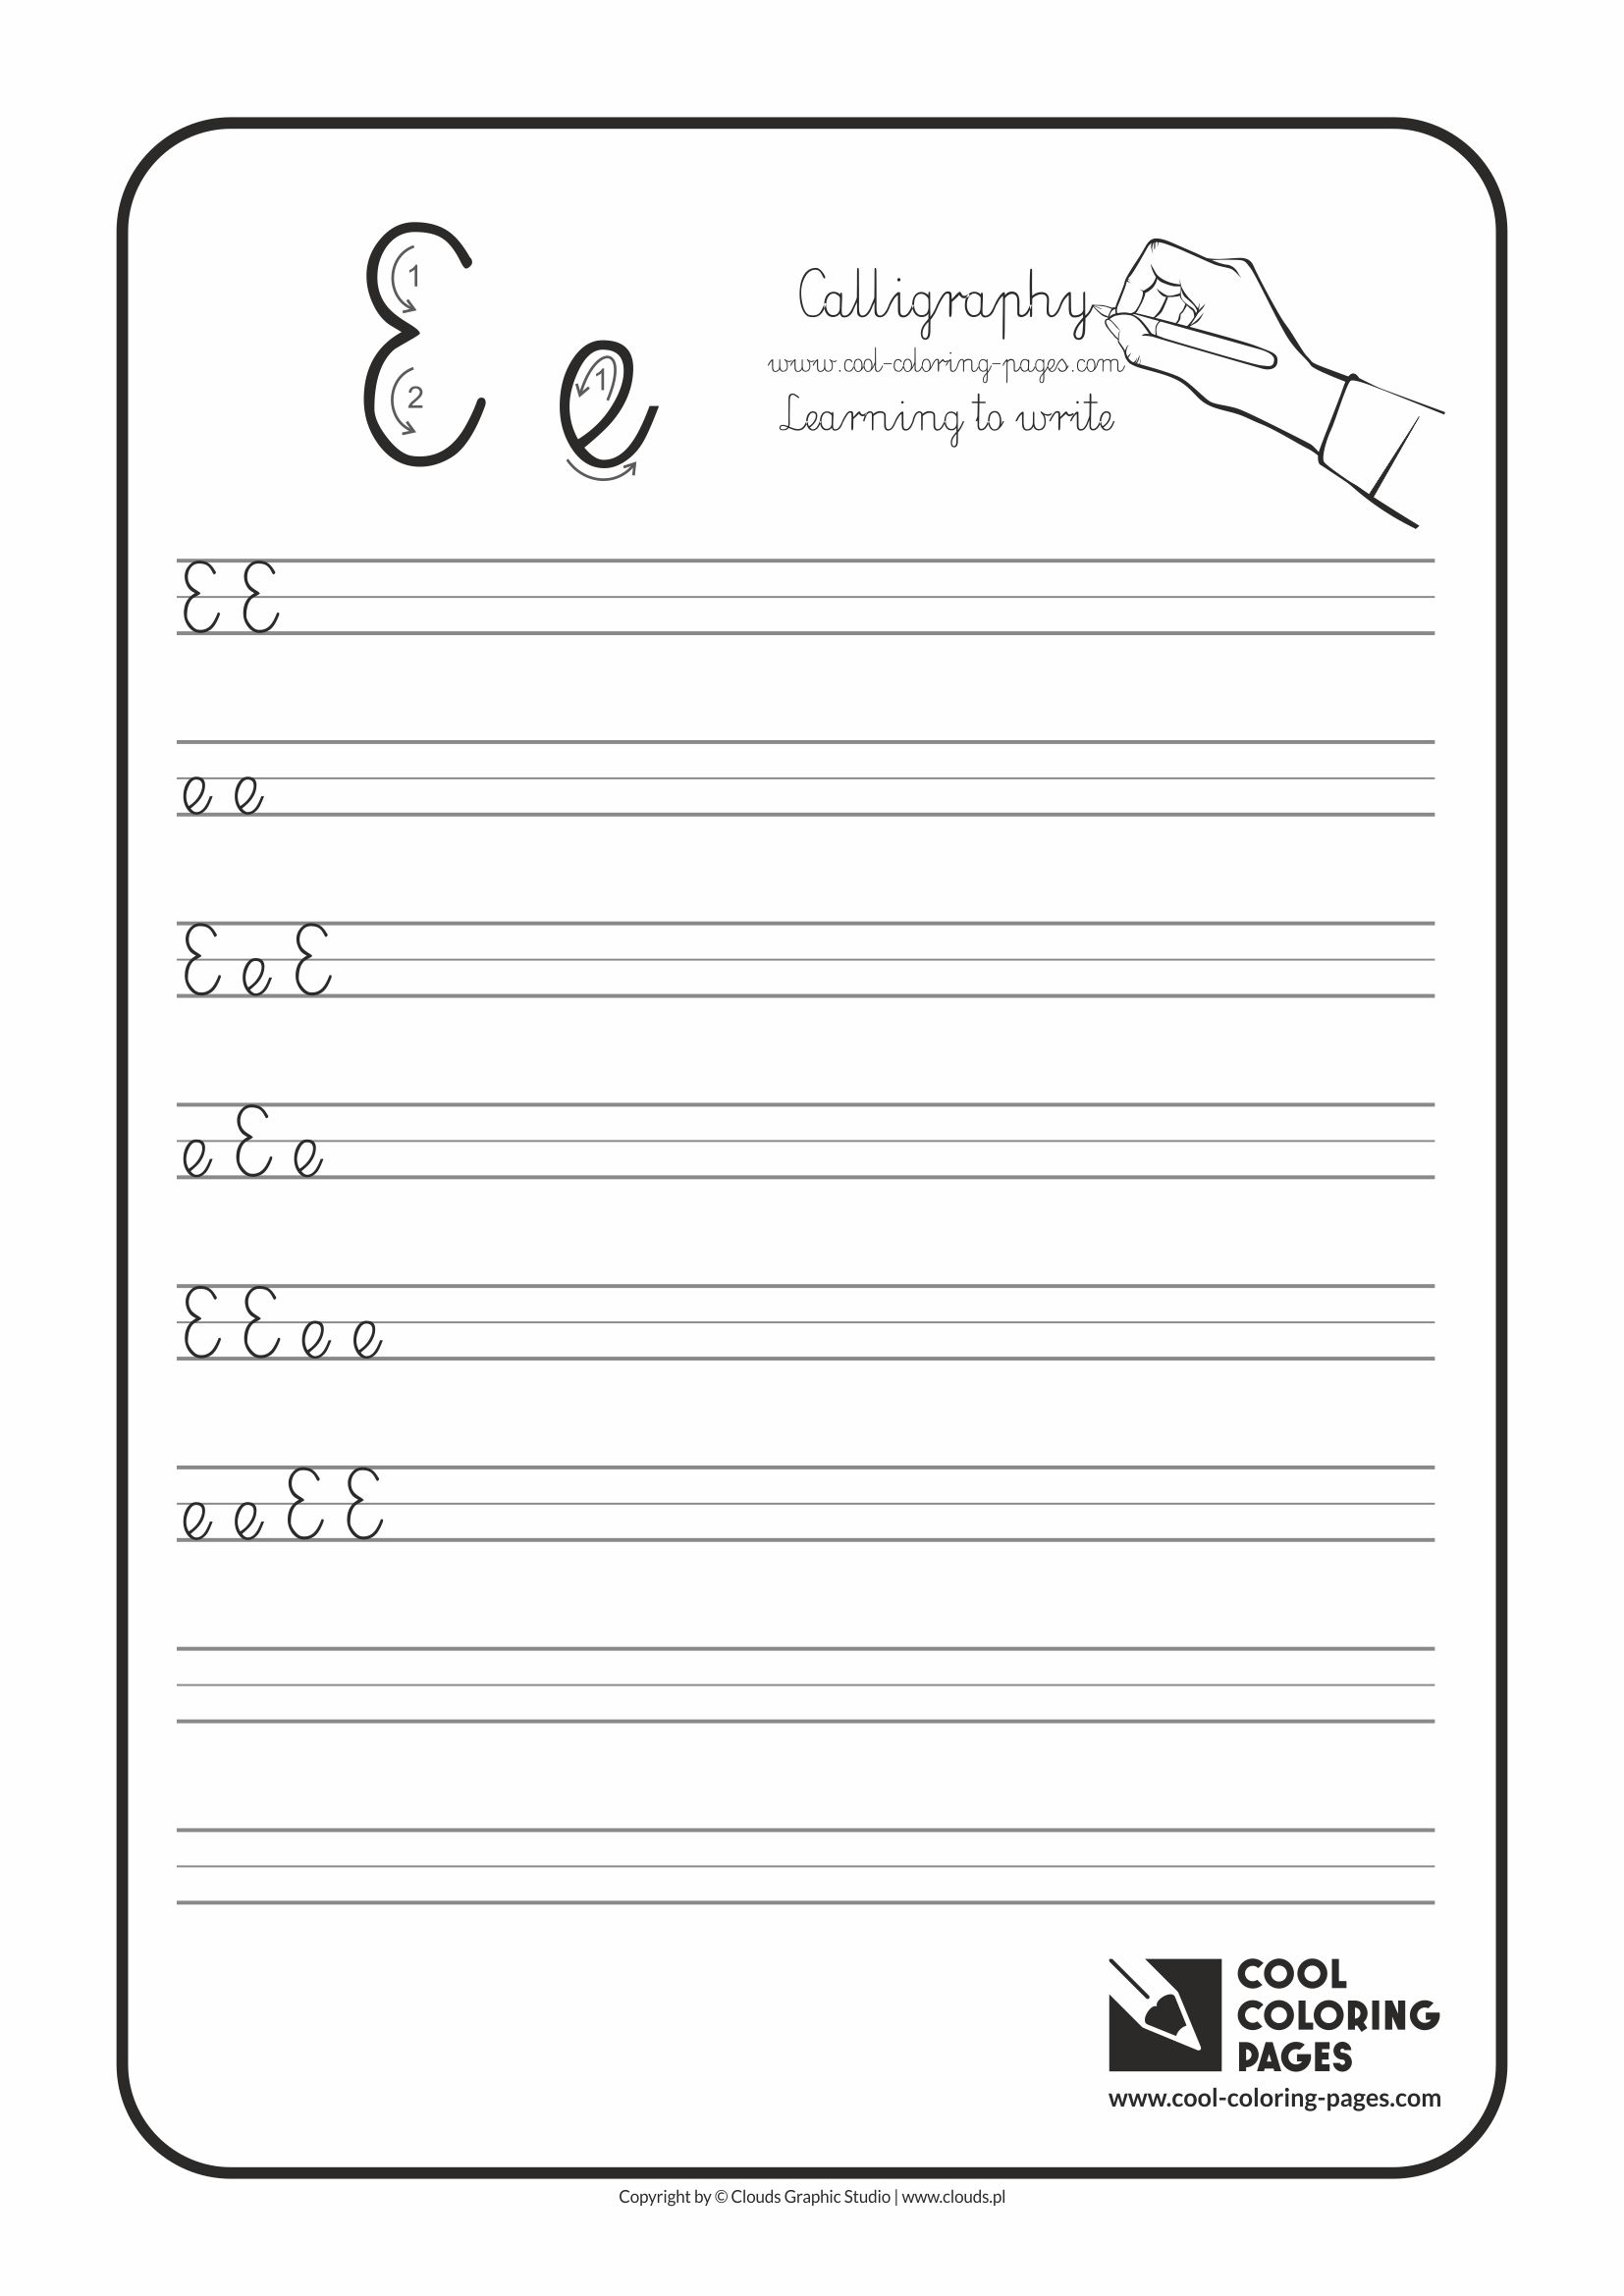 Cool Coloring Pages / Calligraphy / Letter E - Handwriting for kids / Worksheets